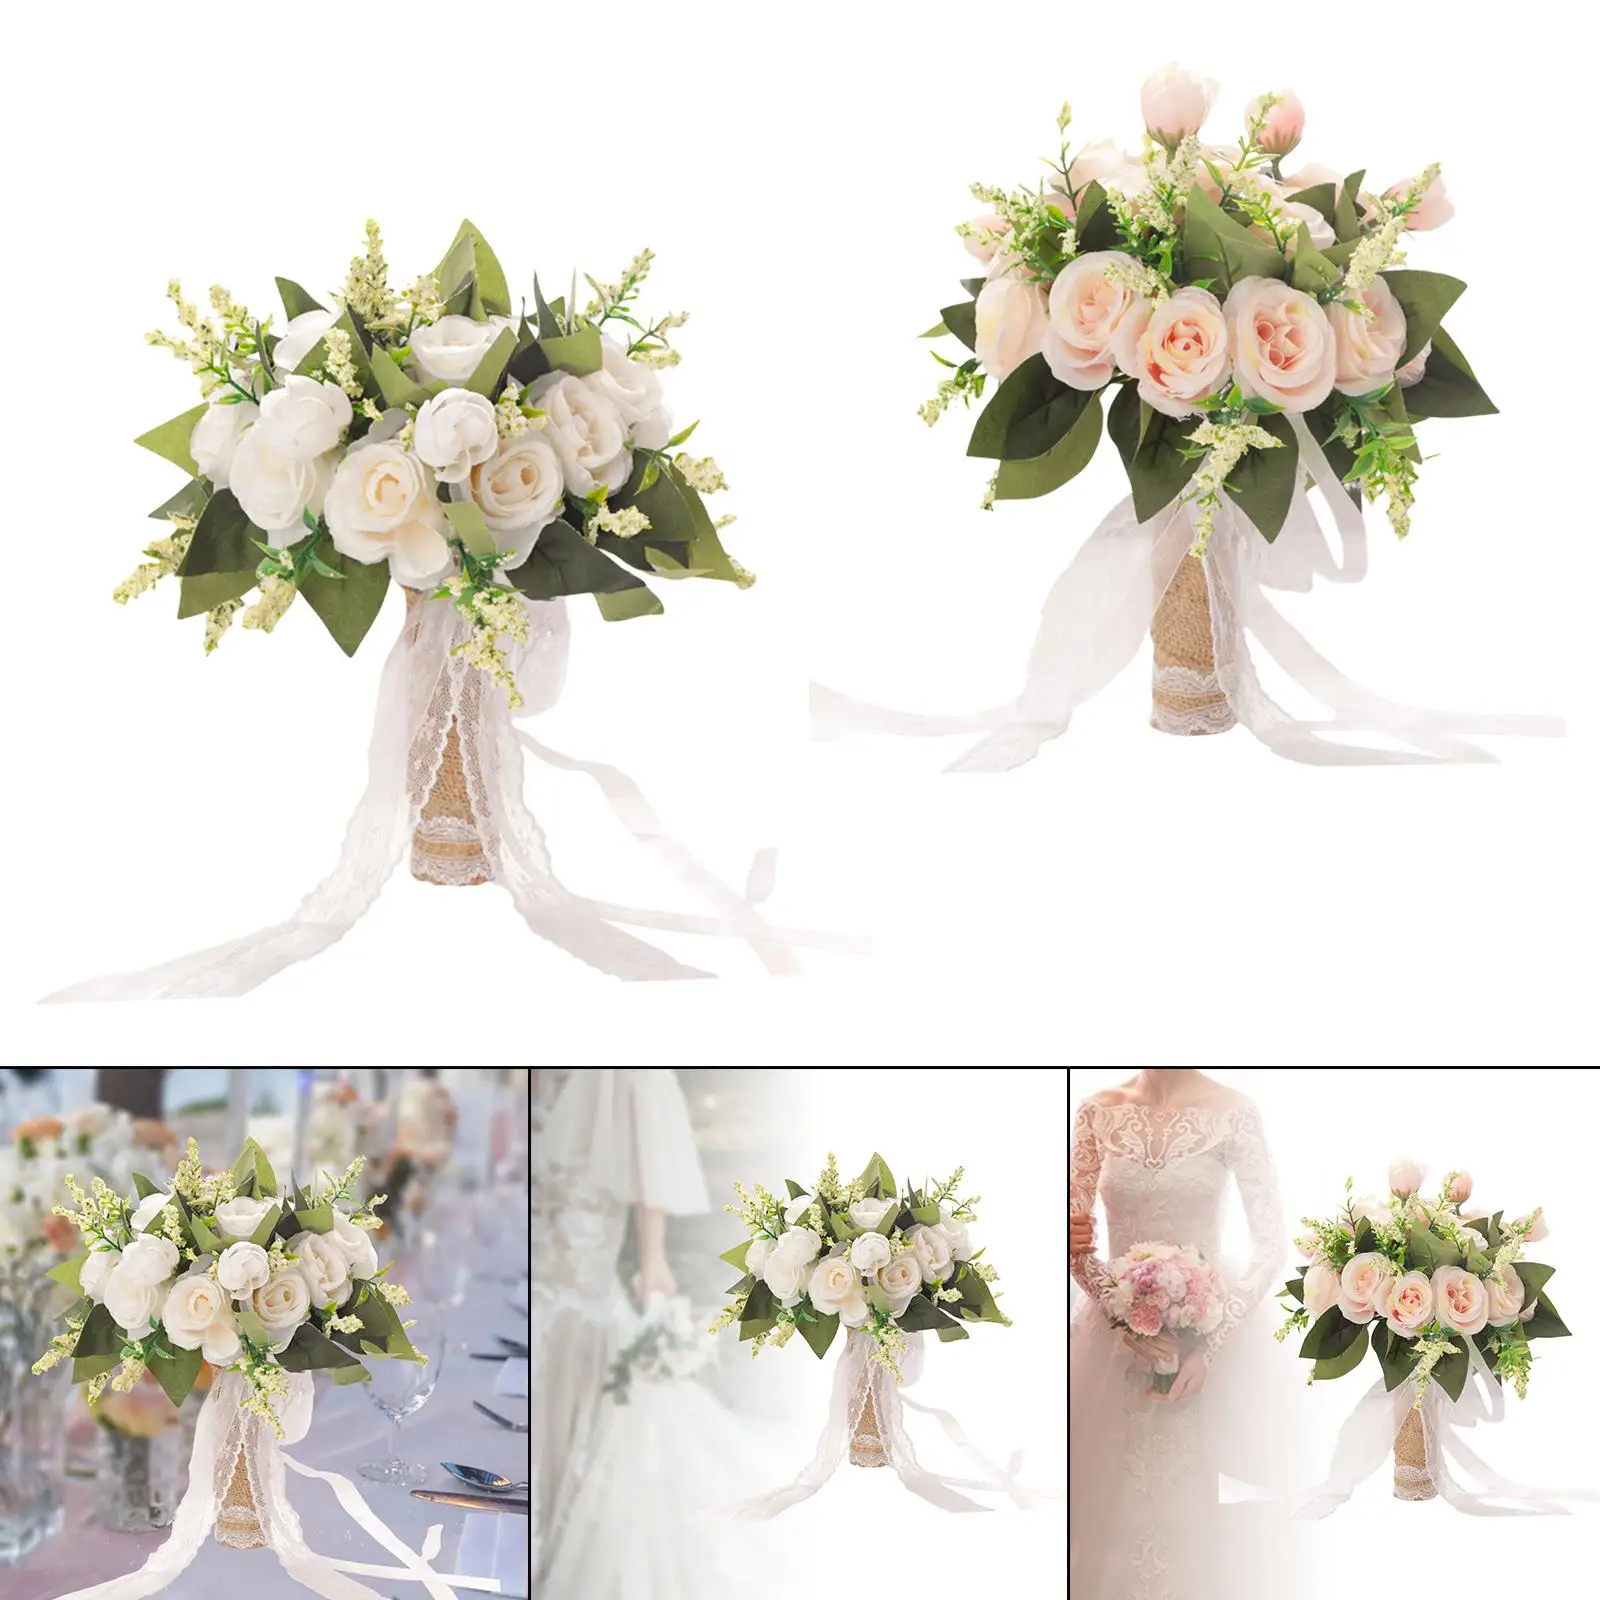 Artificial Bridal Holding Flowers Wedding Bride Bouquet for Party Anniversary Church Bridal Decorations